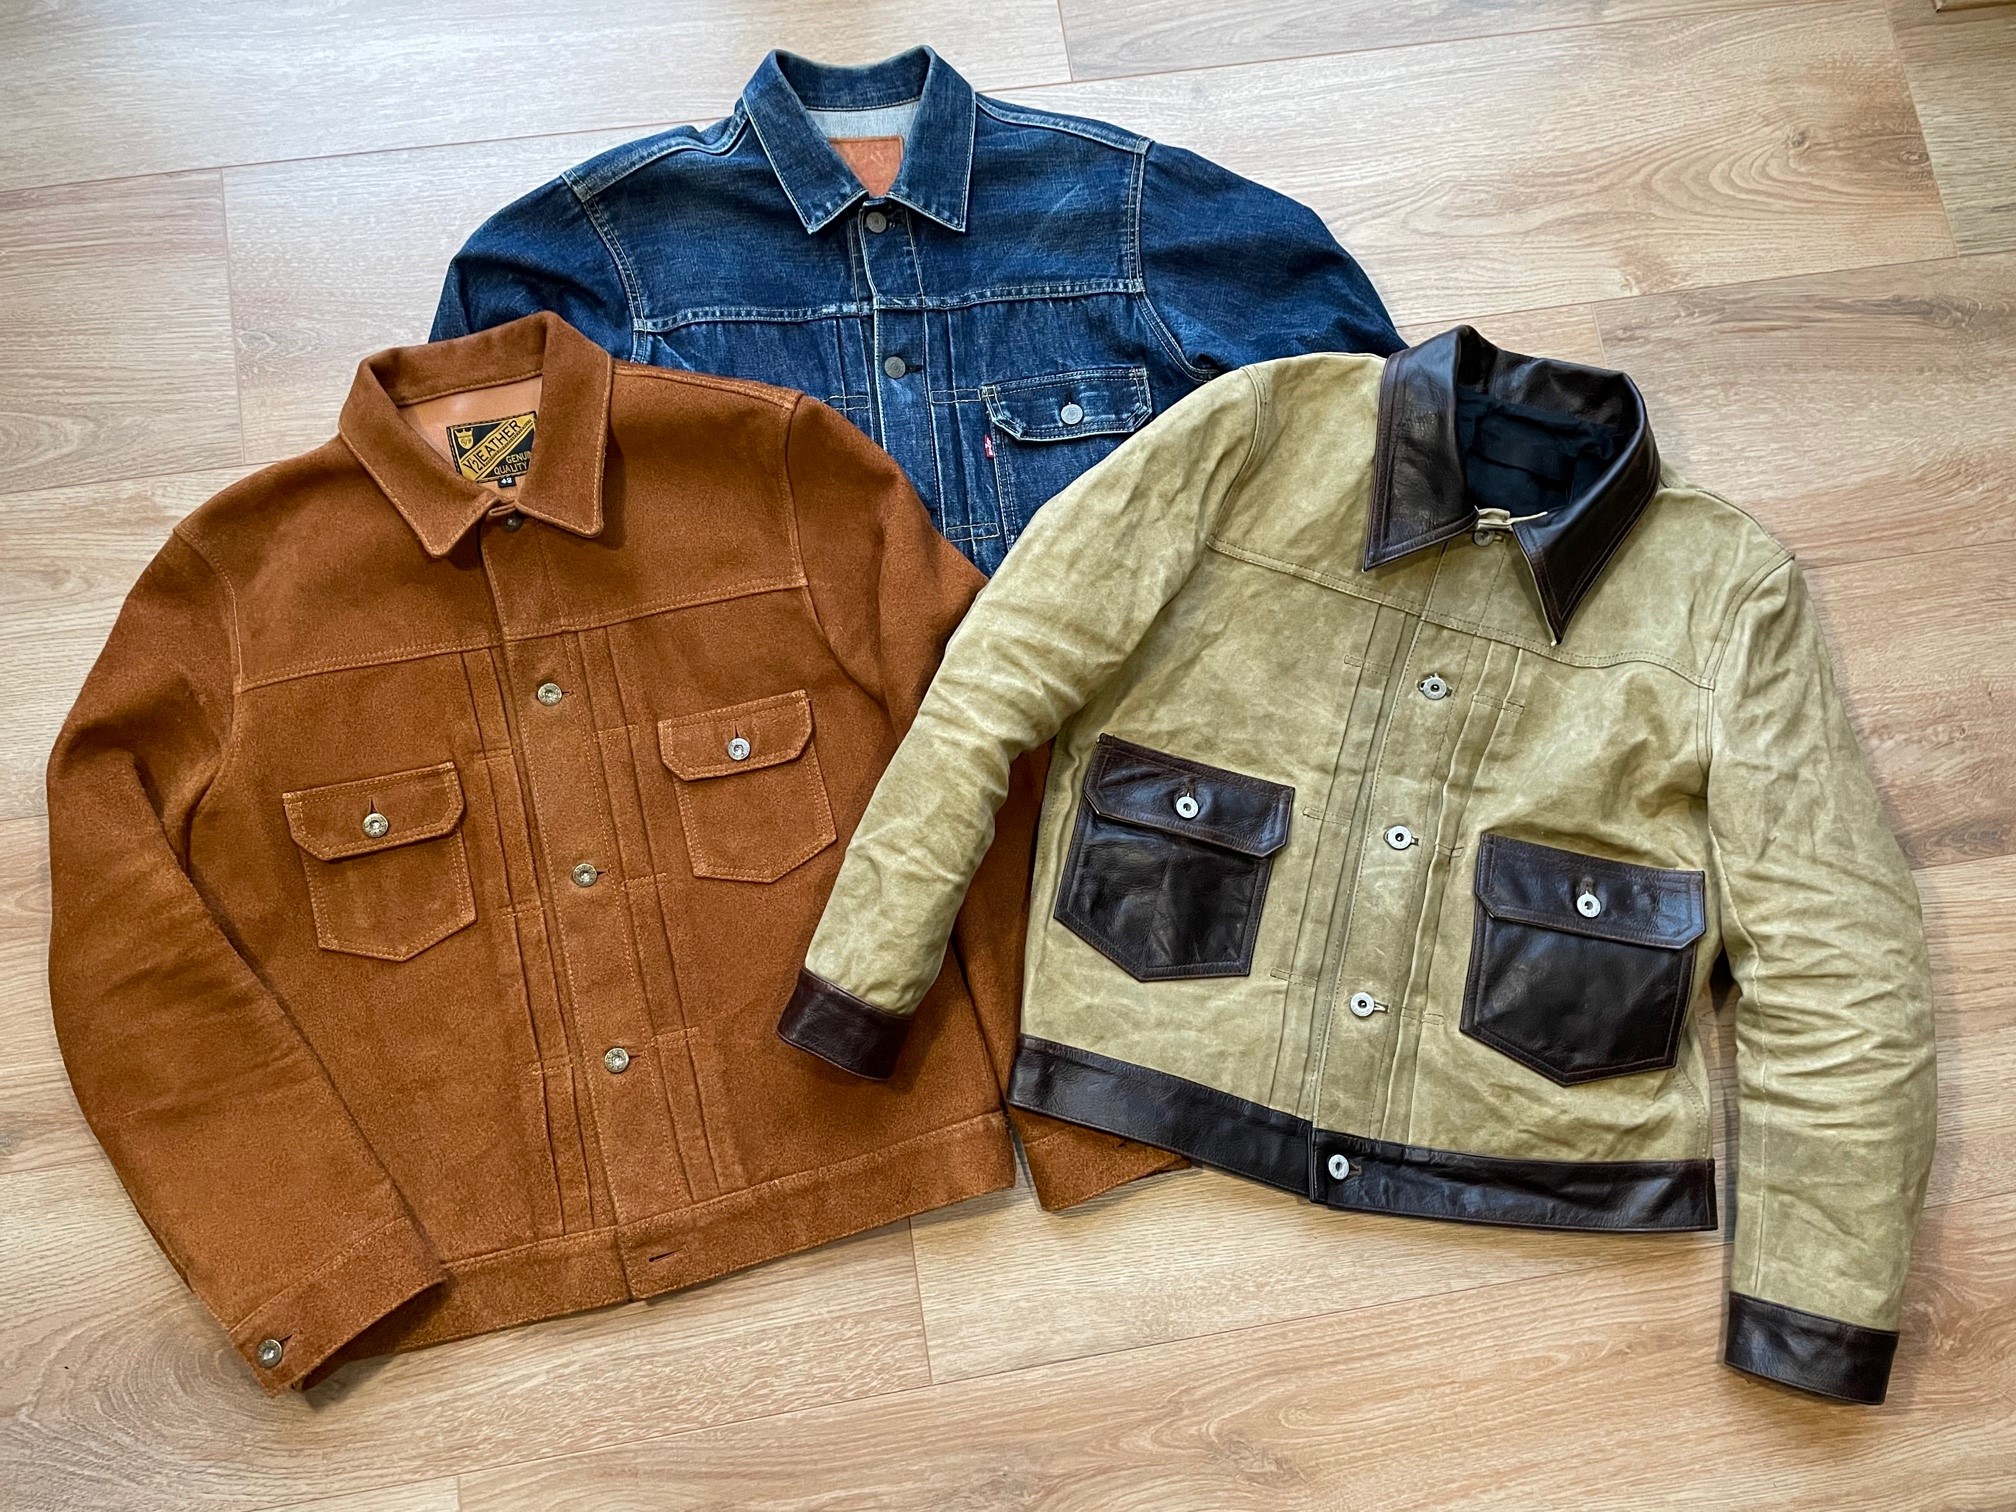 Type II jacket review x3. Denim, Roughout and waxed canvas/leather